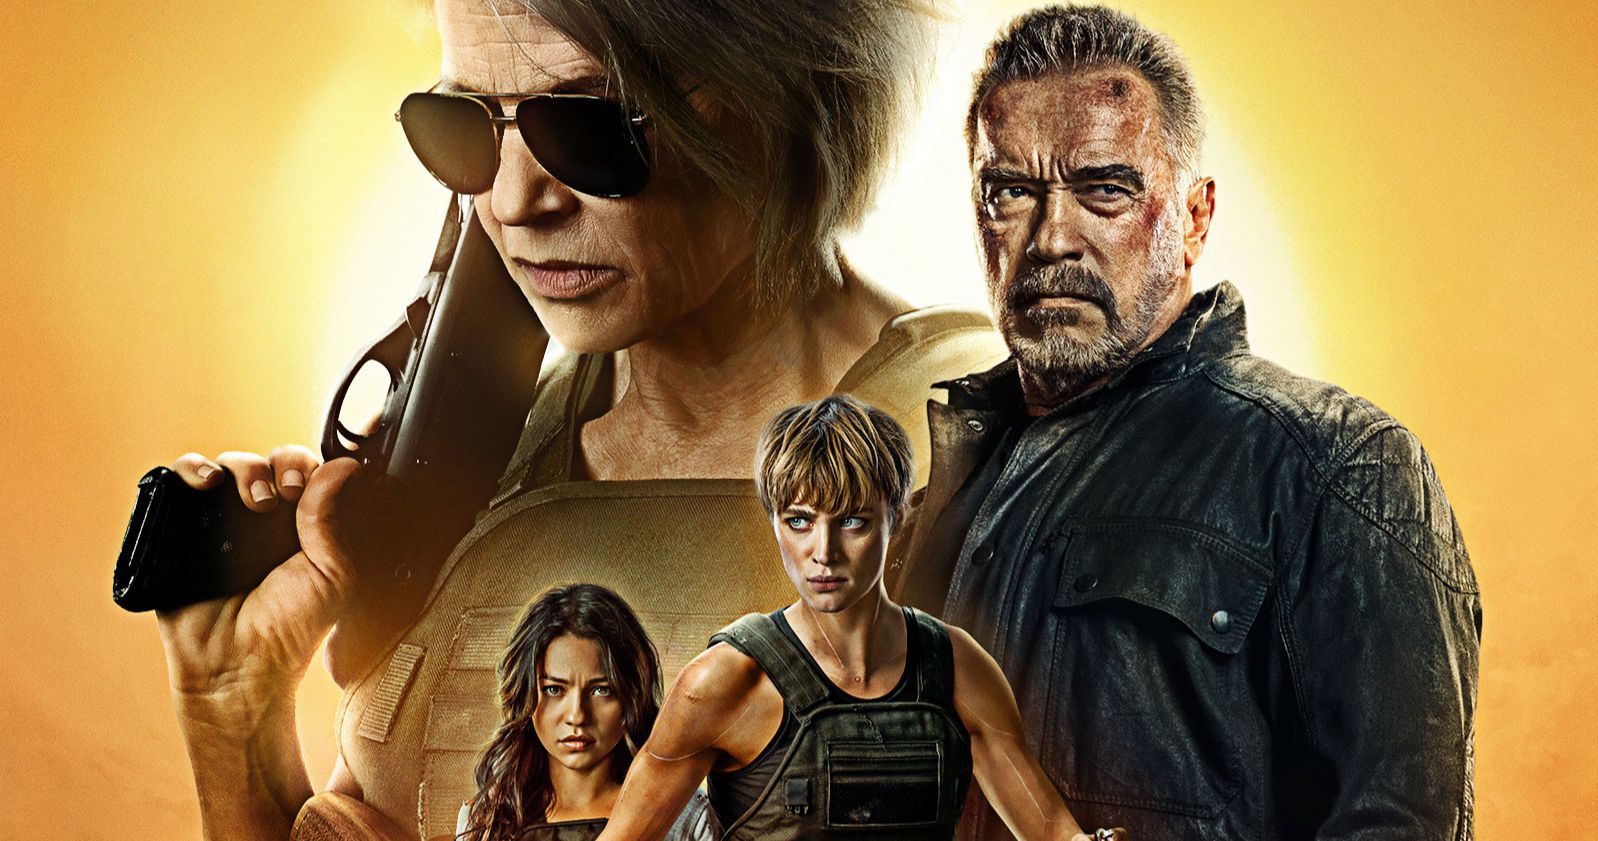 Terminator: Dark Fate Comes to 4K, Blu-Ray This January with Deleted and Extended Scenes